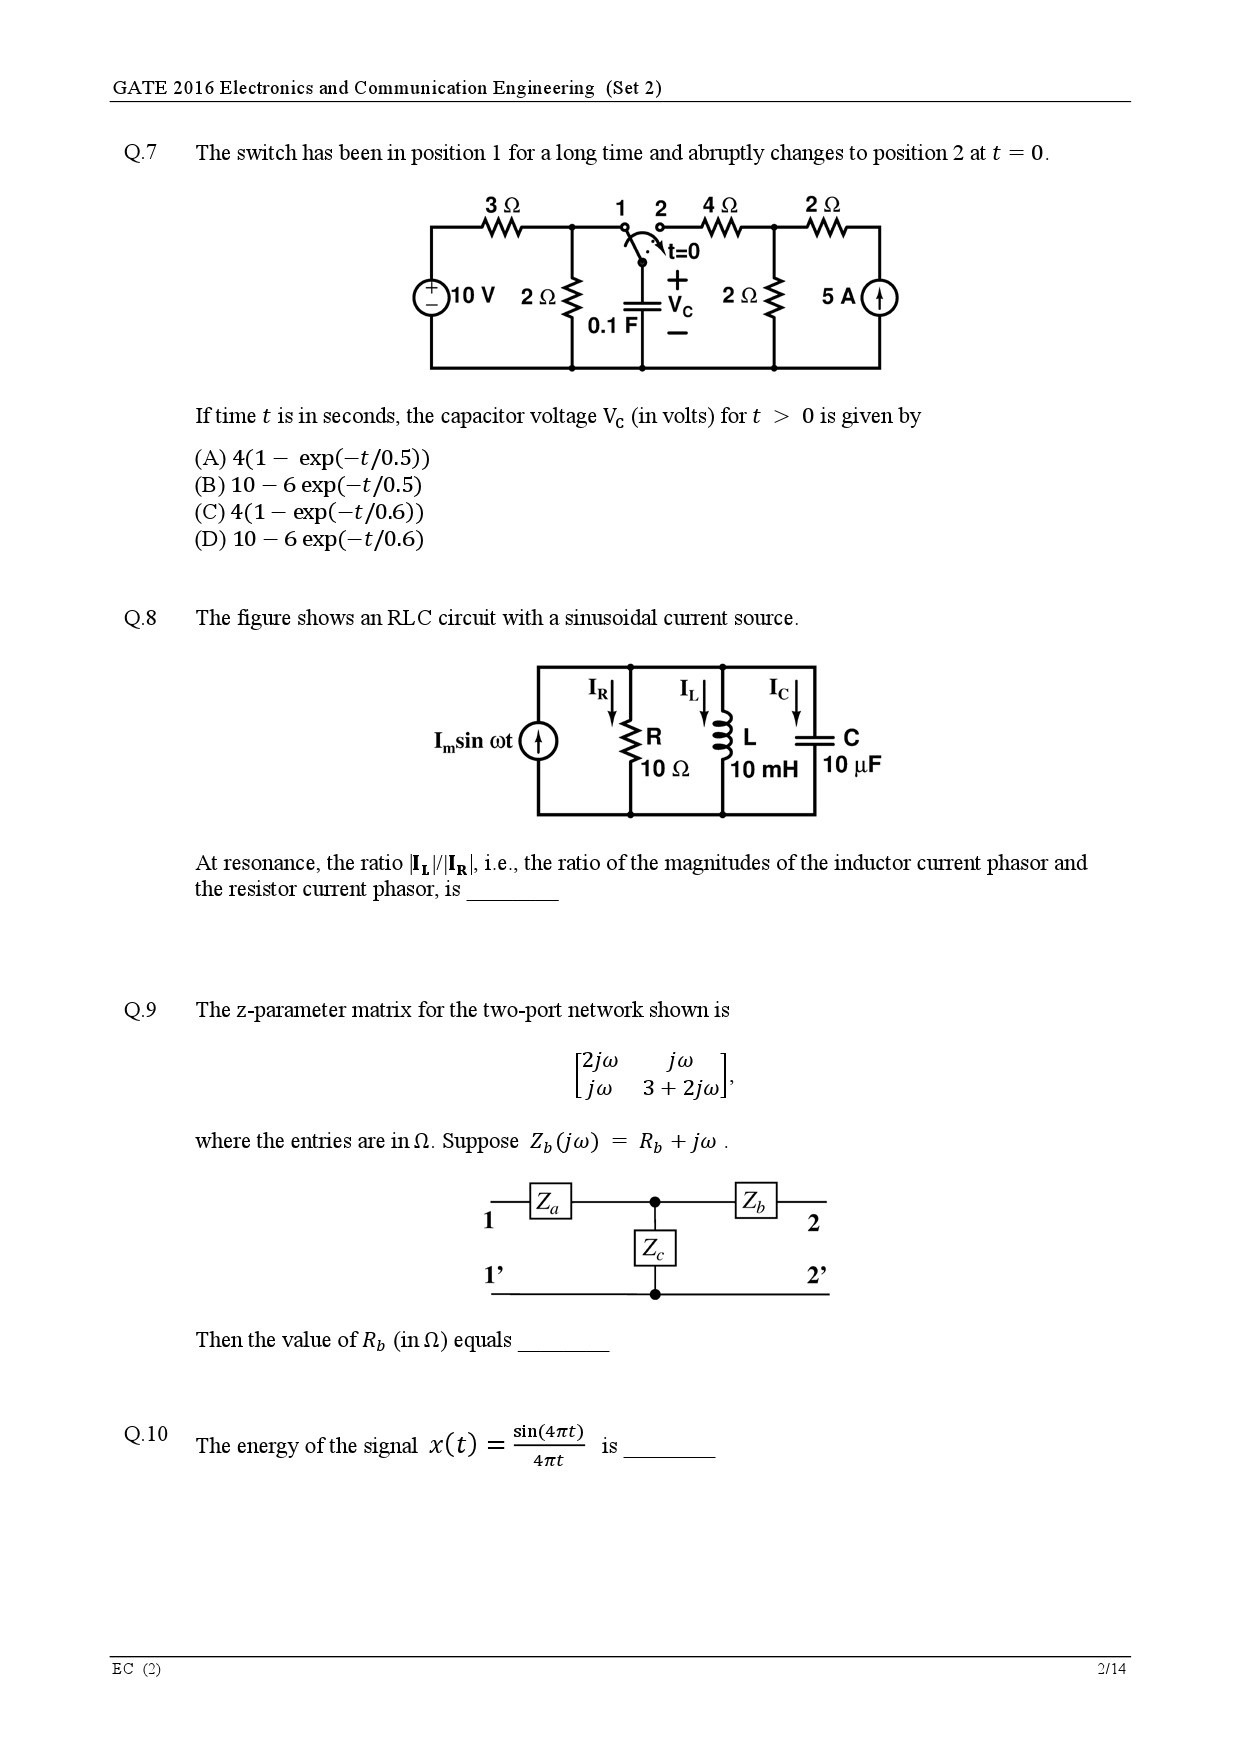 GATE Exam Question Paper 2016 Electronics and Communication Engineering Set 2 5